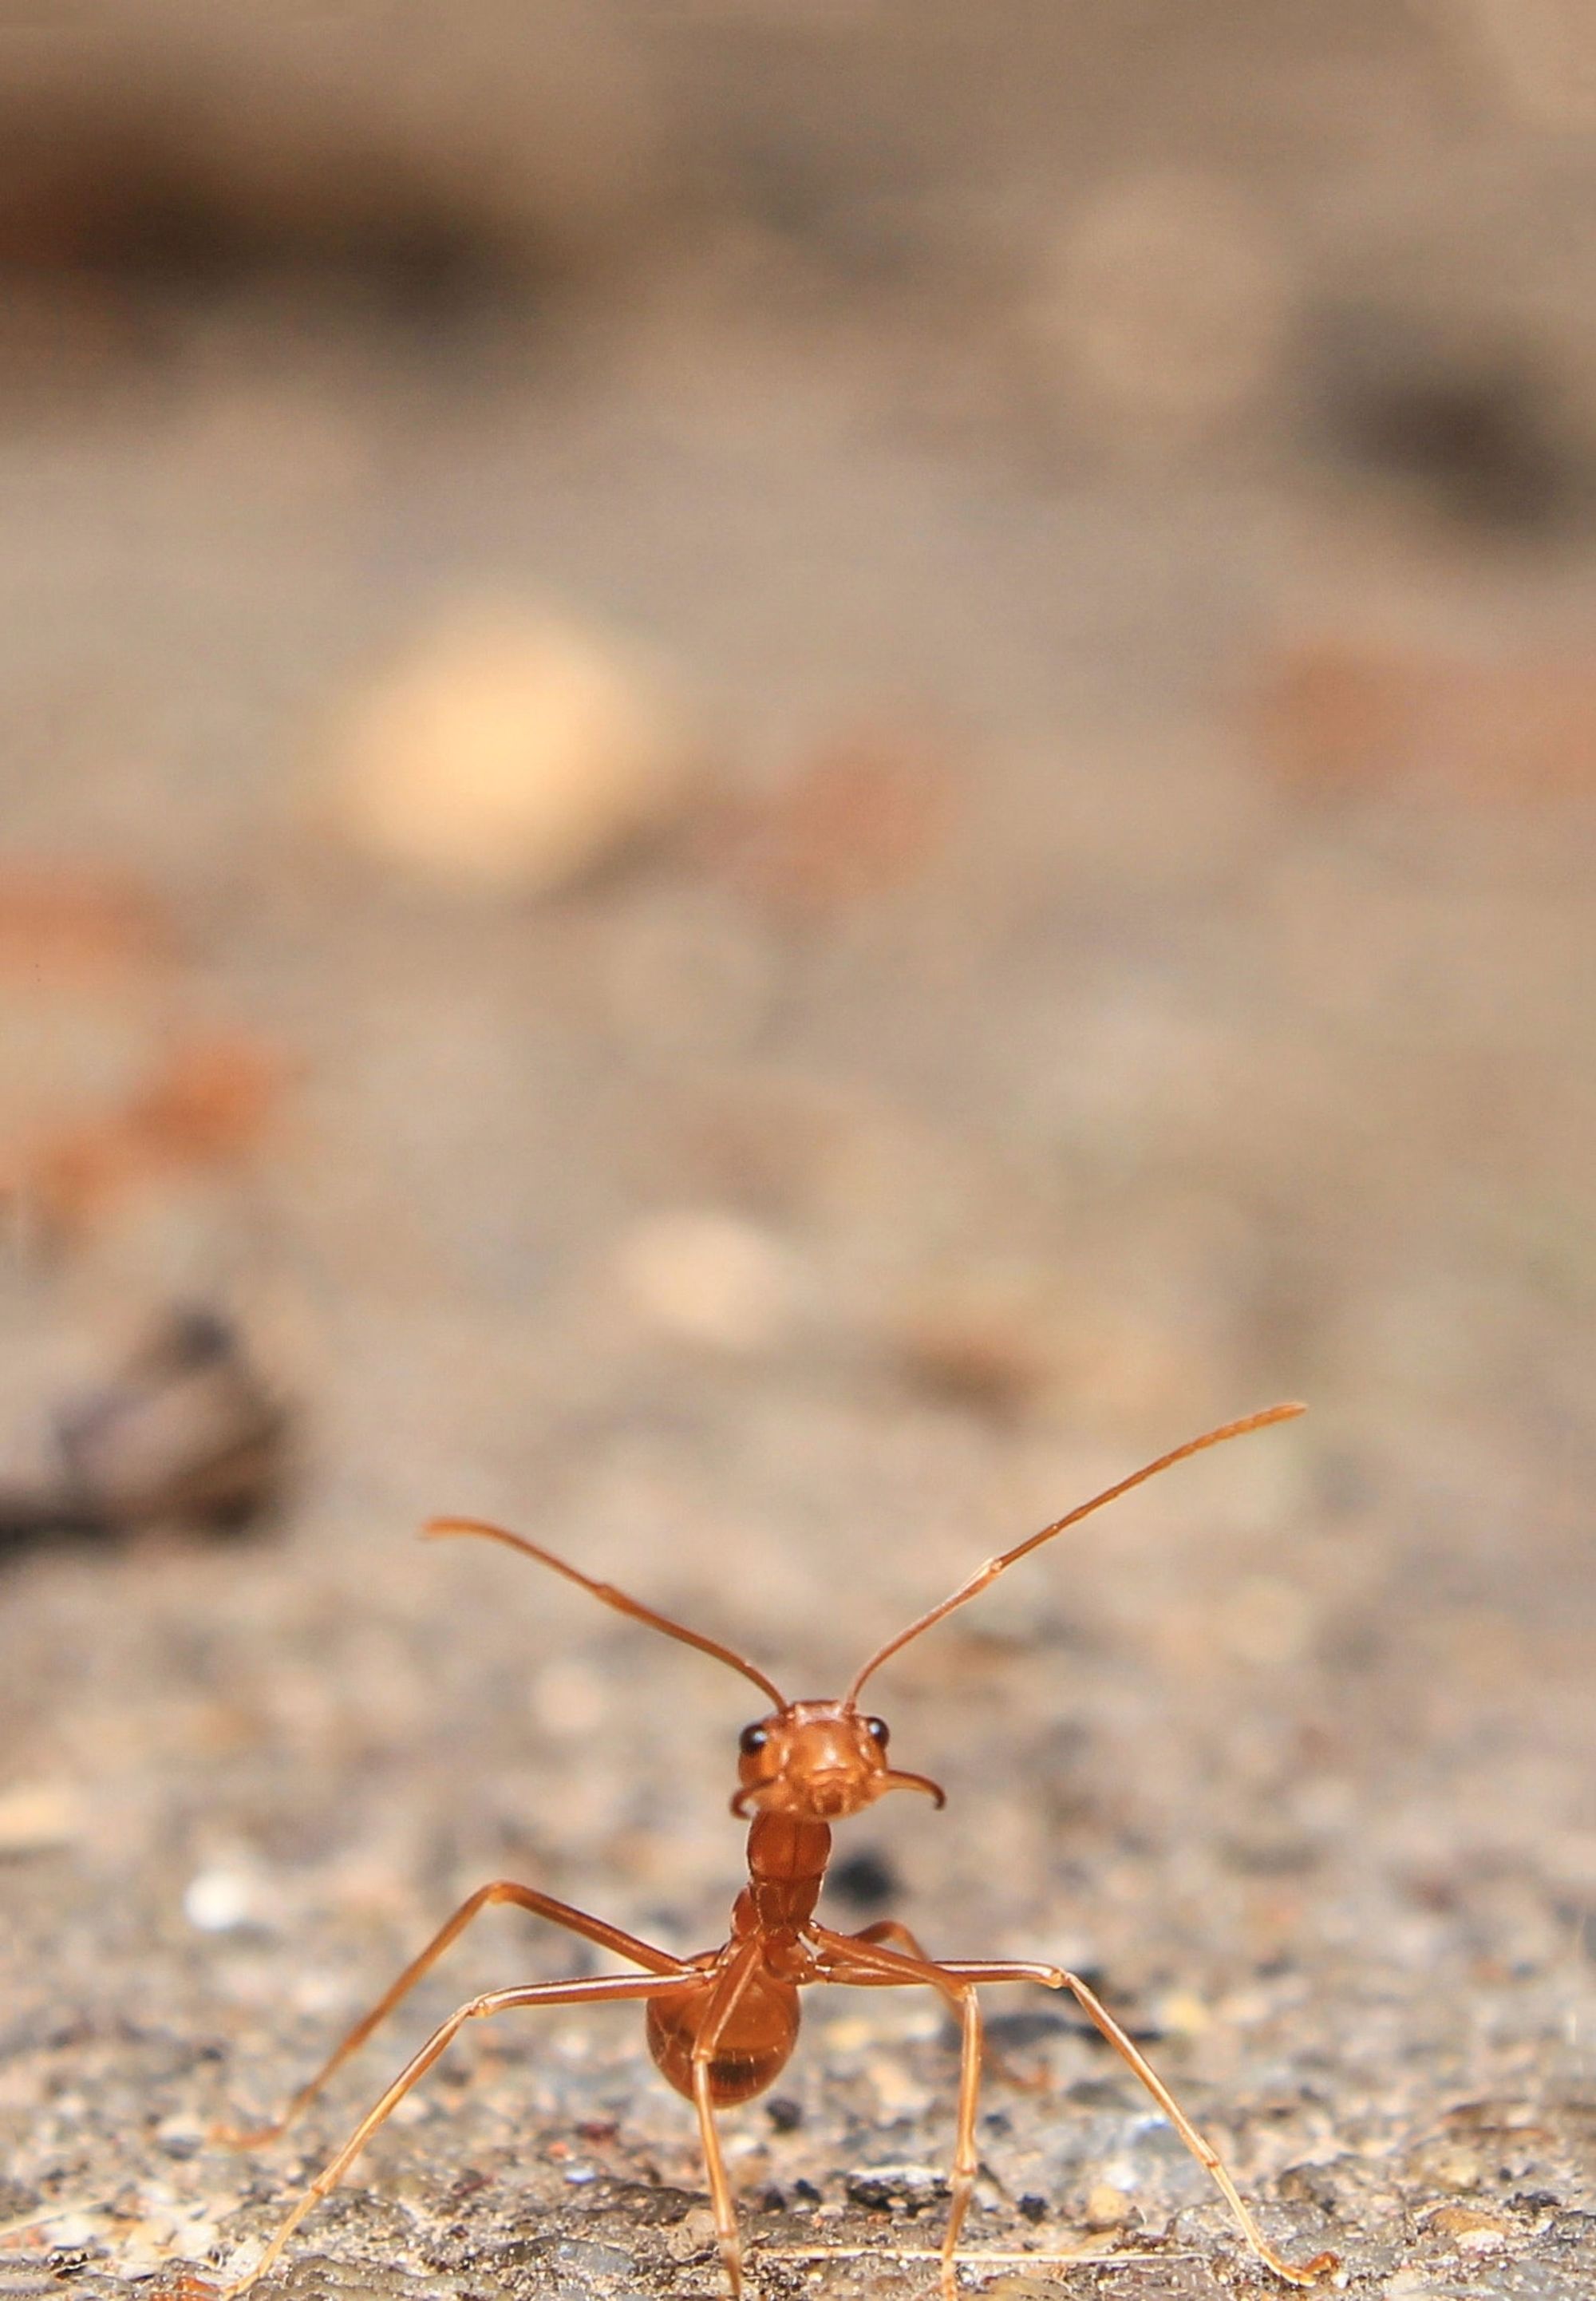 one lone ant appearing curious and docile, gazing up into the camera